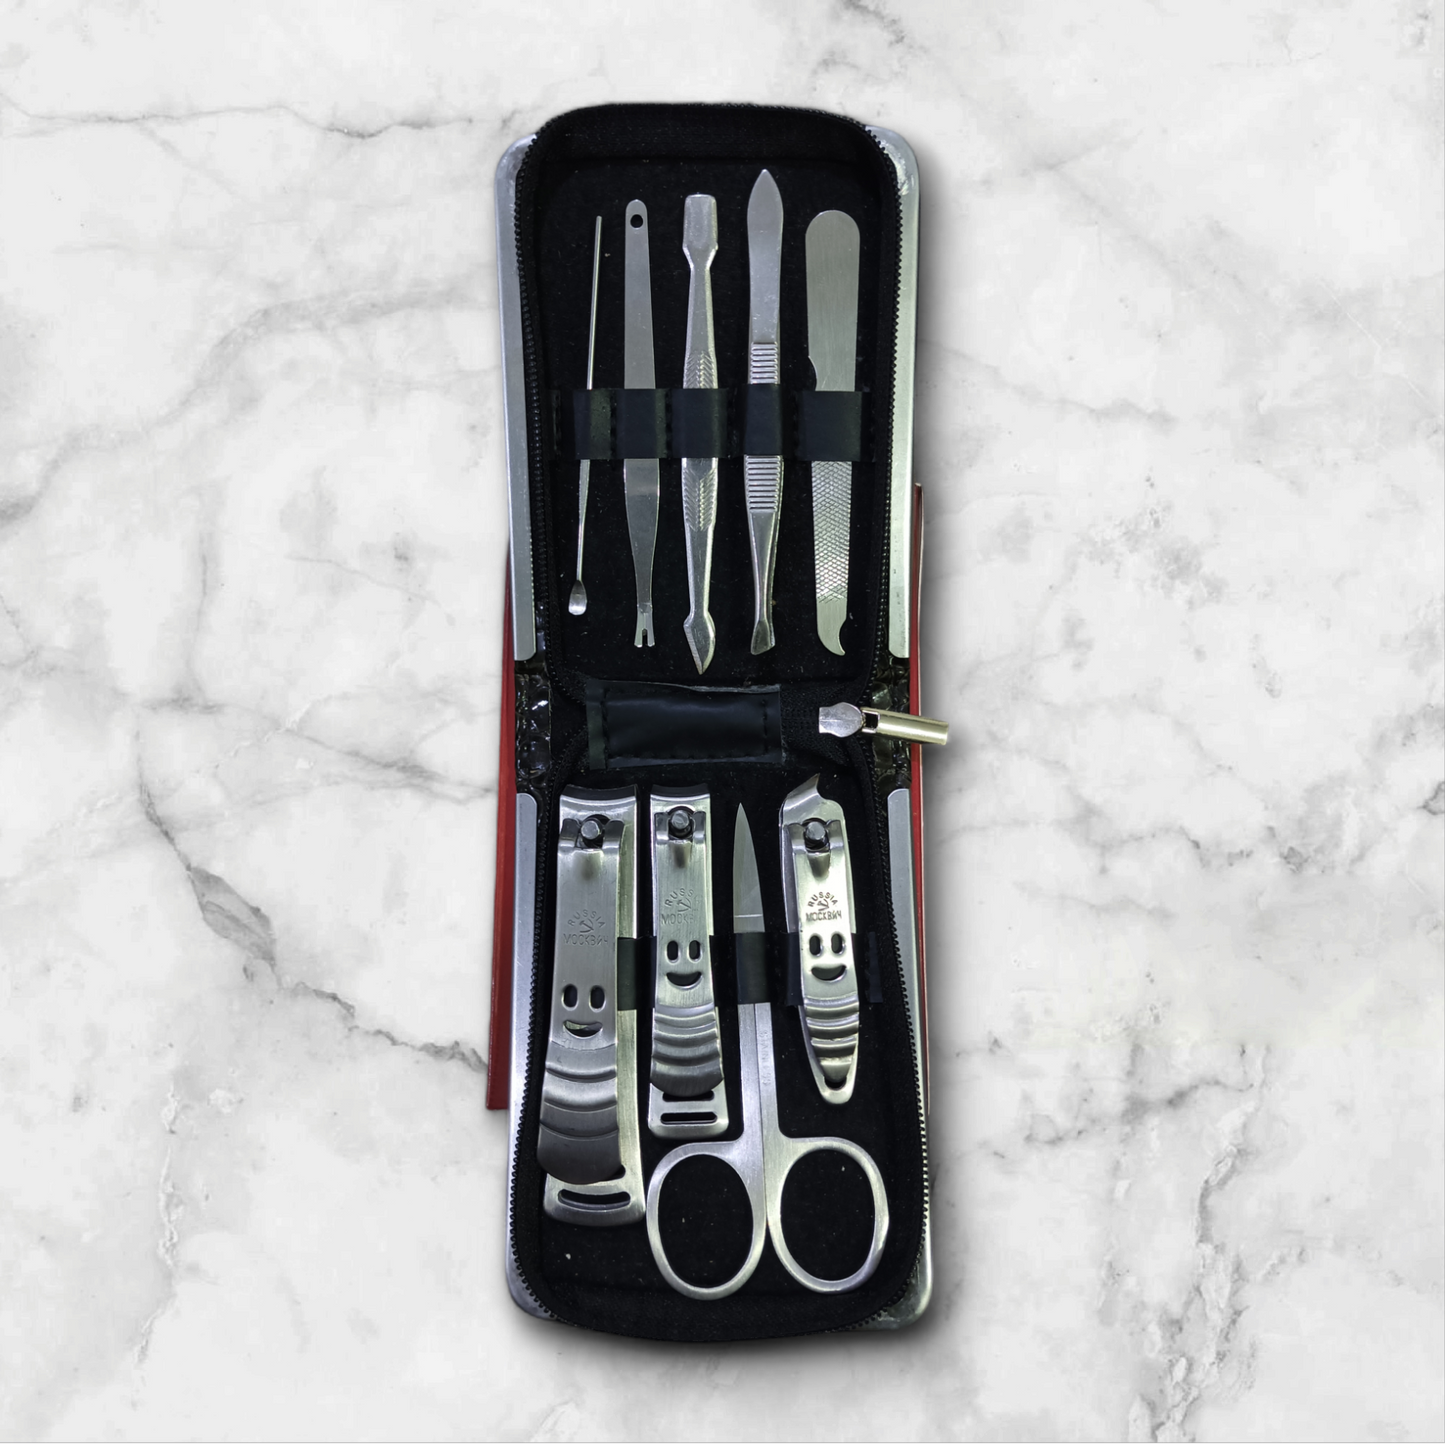 9 Pc's Manicure Tool Set Stainless Steel